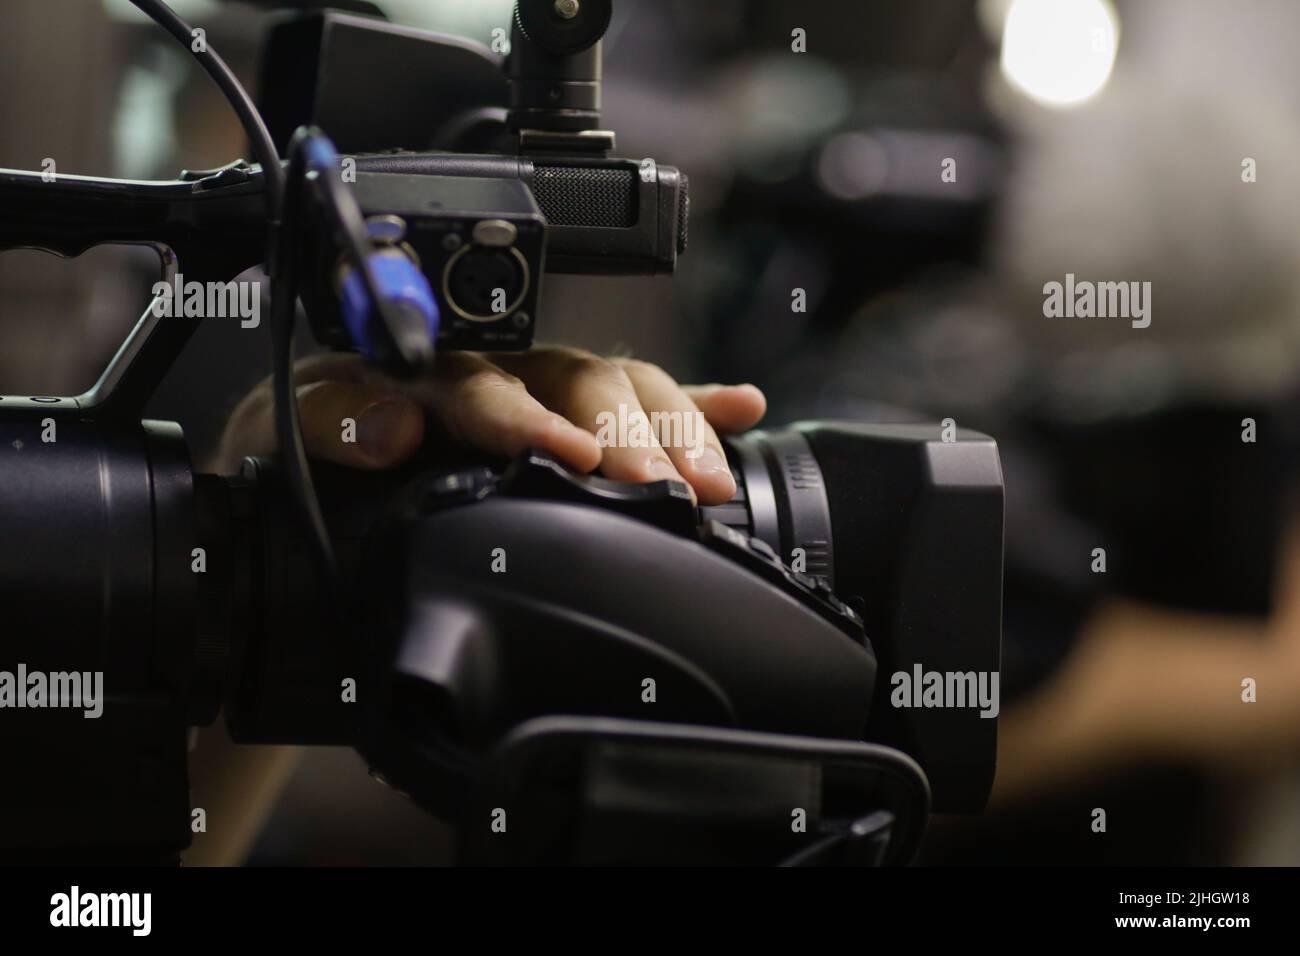 Shallow depth of field (selective focus) details with the hands of a news camera operator using buttons of his camera during a press event. Stock Photo